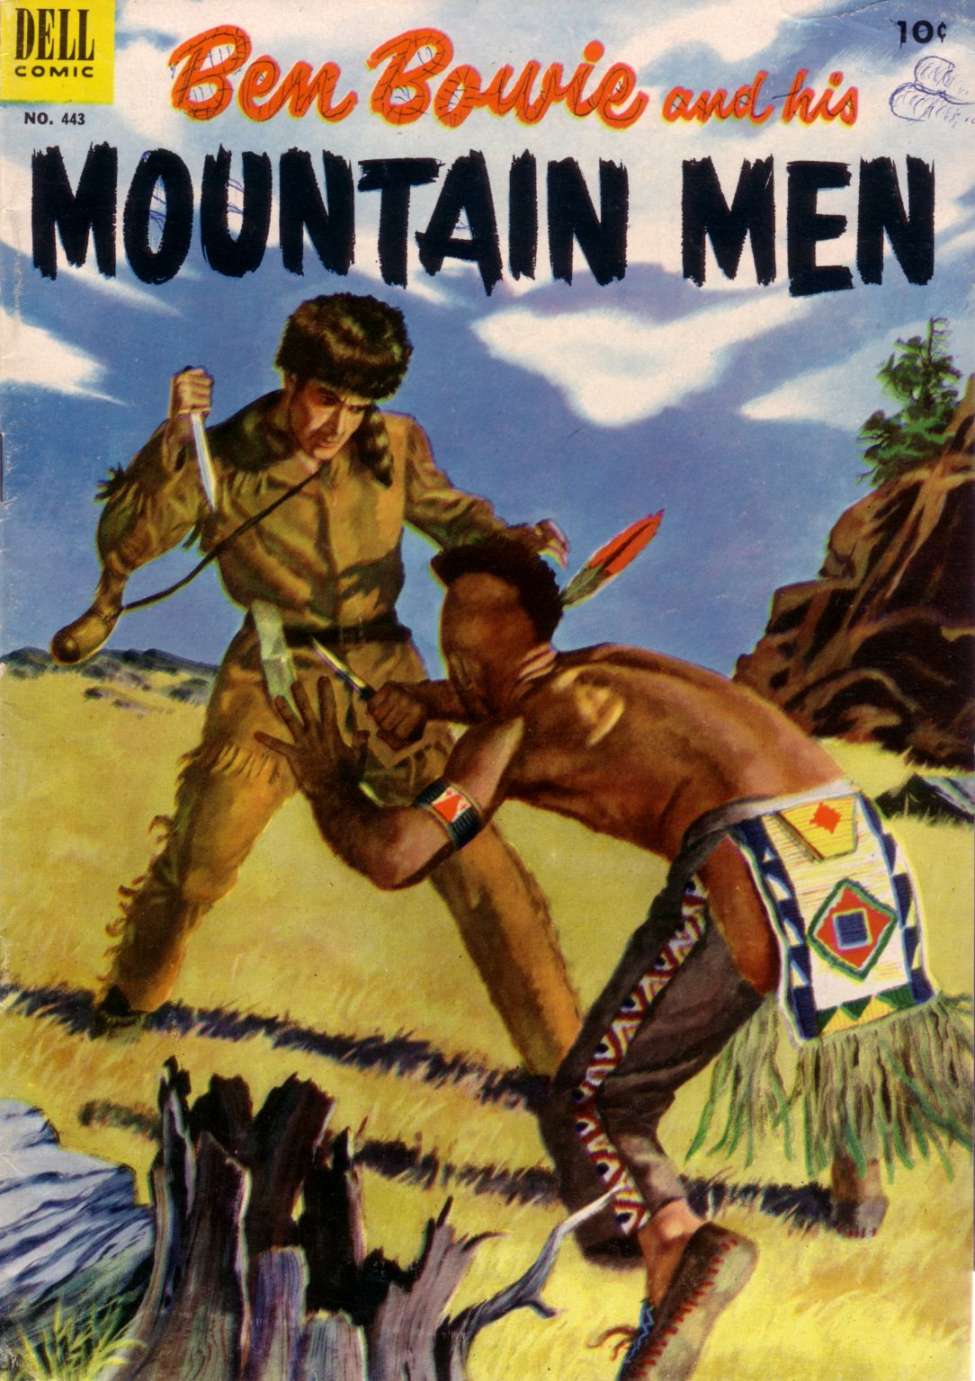 Book Cover For 0443 - Ben Bowie and his Mountain Men